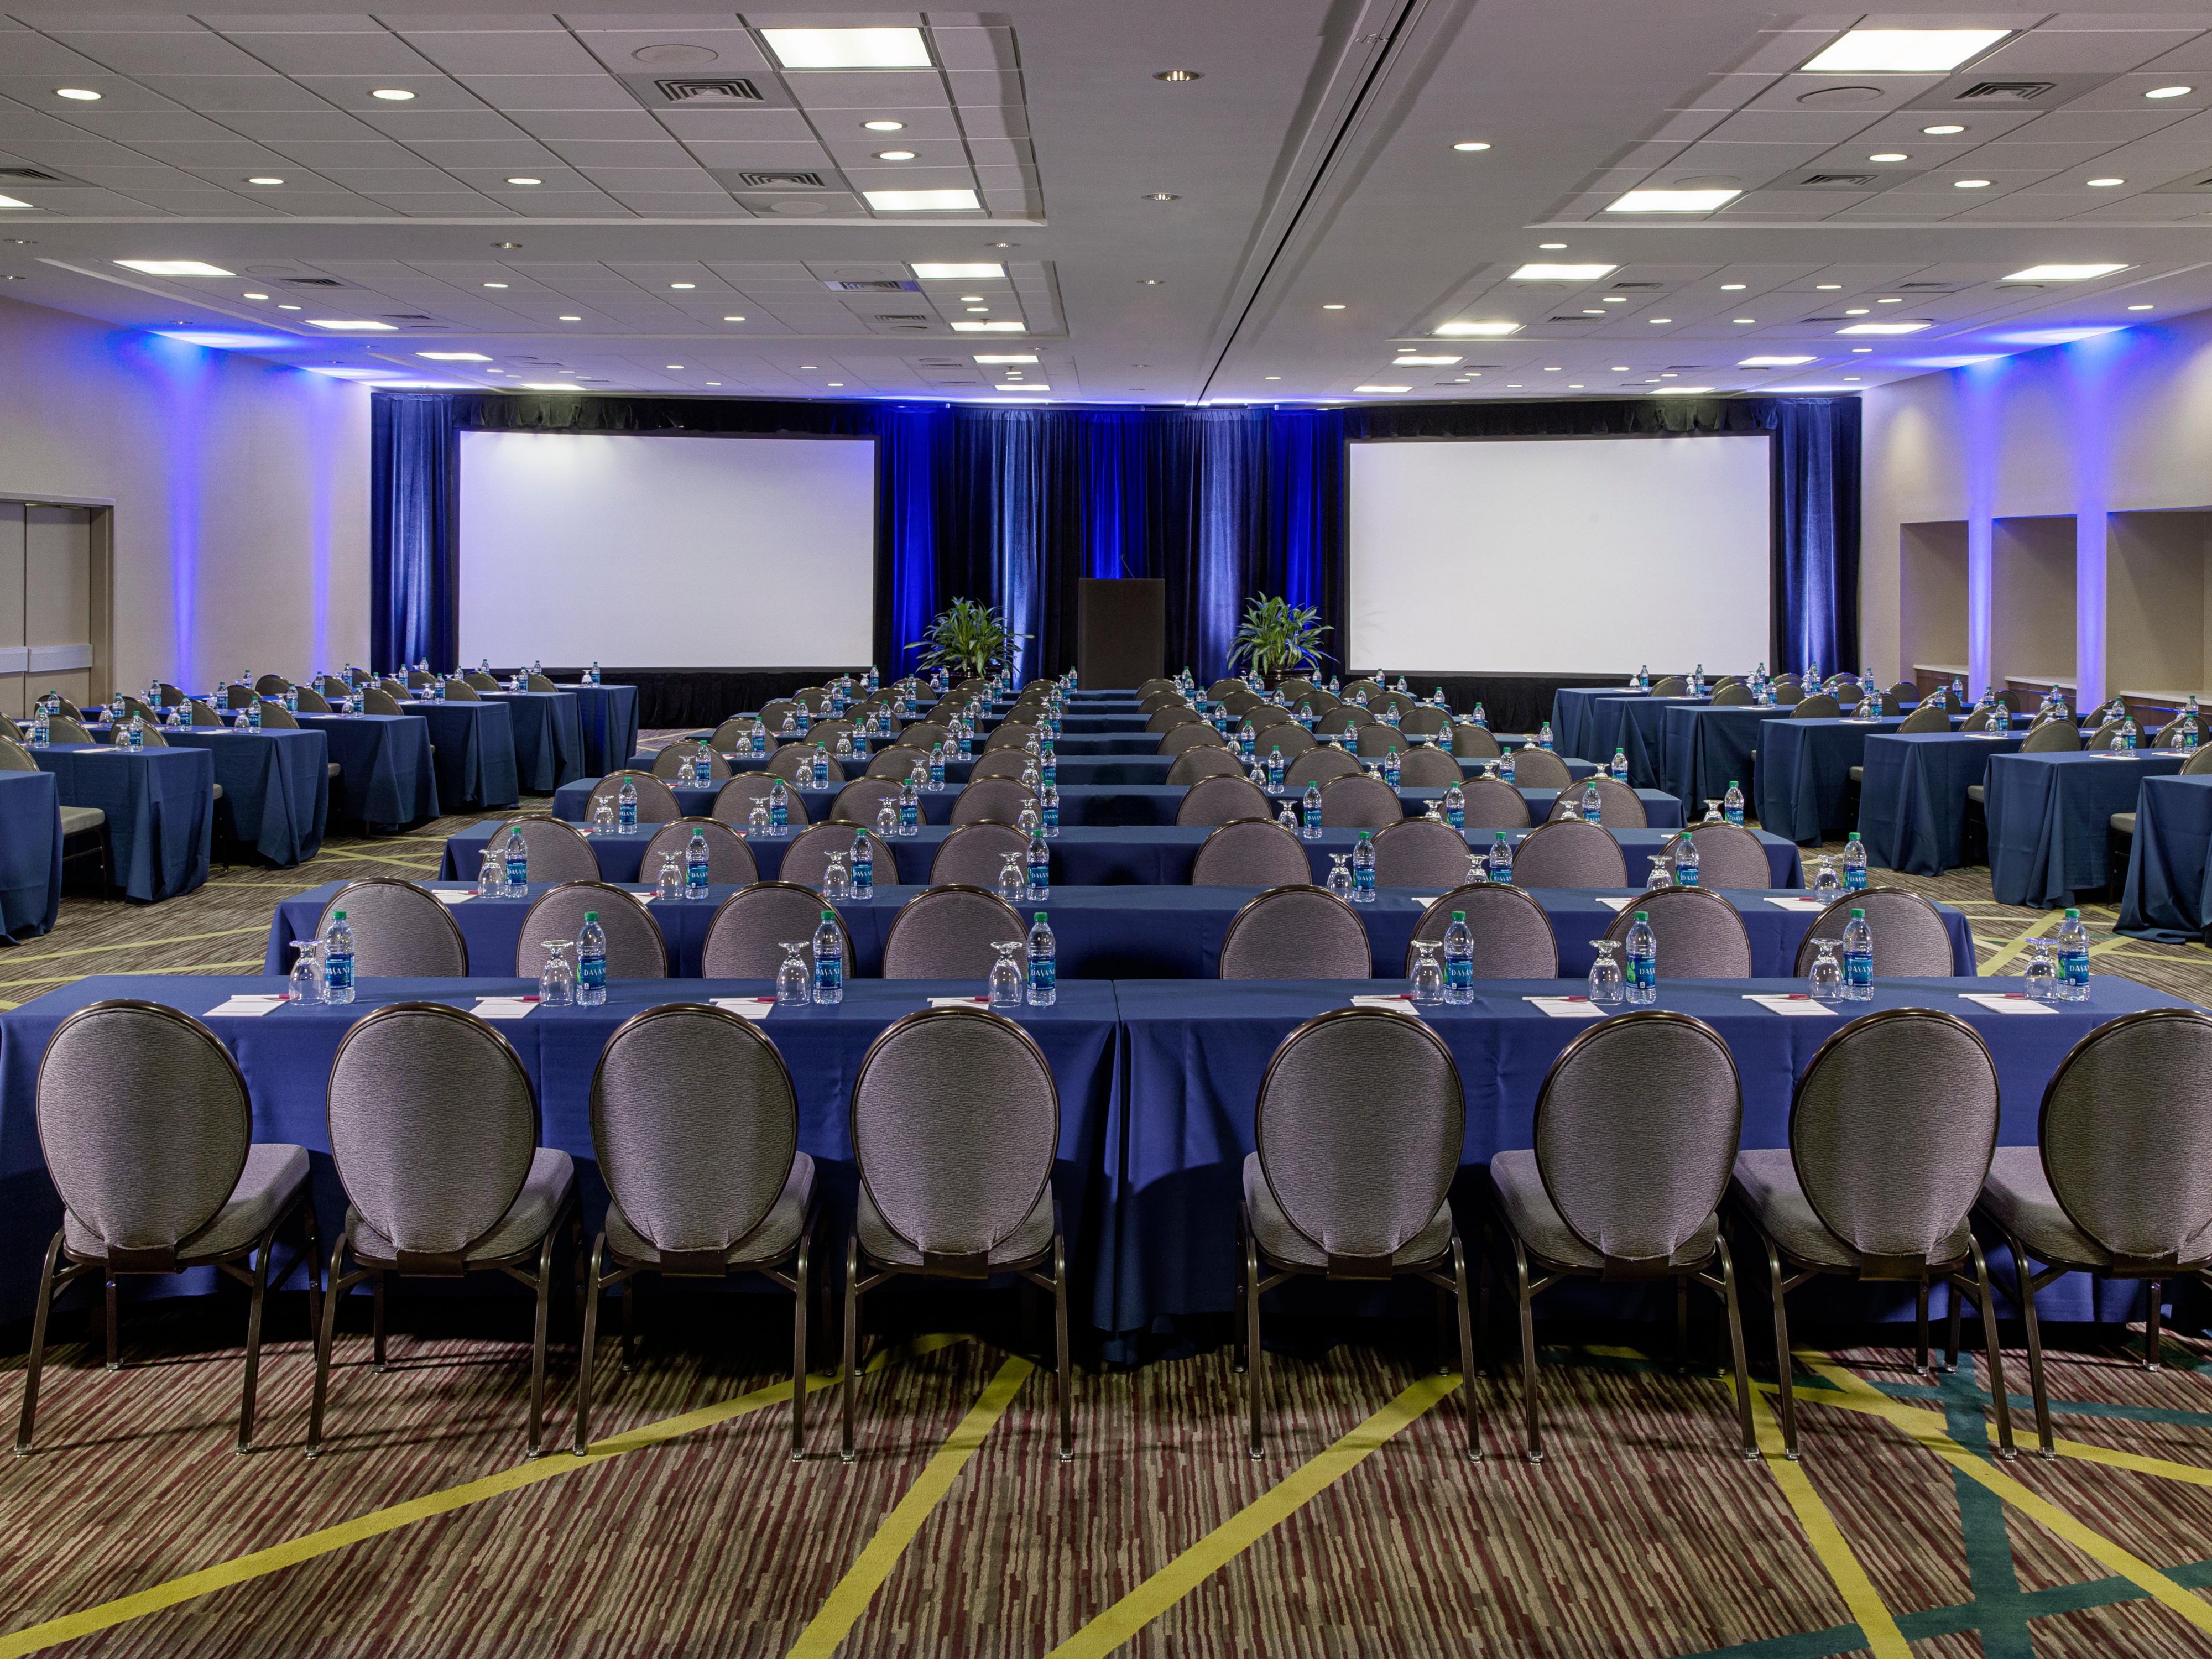 Unlock the potential of your event with our expansive 31,000 sq. ft. of flexible meeting space spread across 17 rooms. From intimate gatherings to grand affairs accommodating up to 700 guests, our exceptional venues blend modern amenities with magnificent settings, ensuring your event leaves a lasting impression.